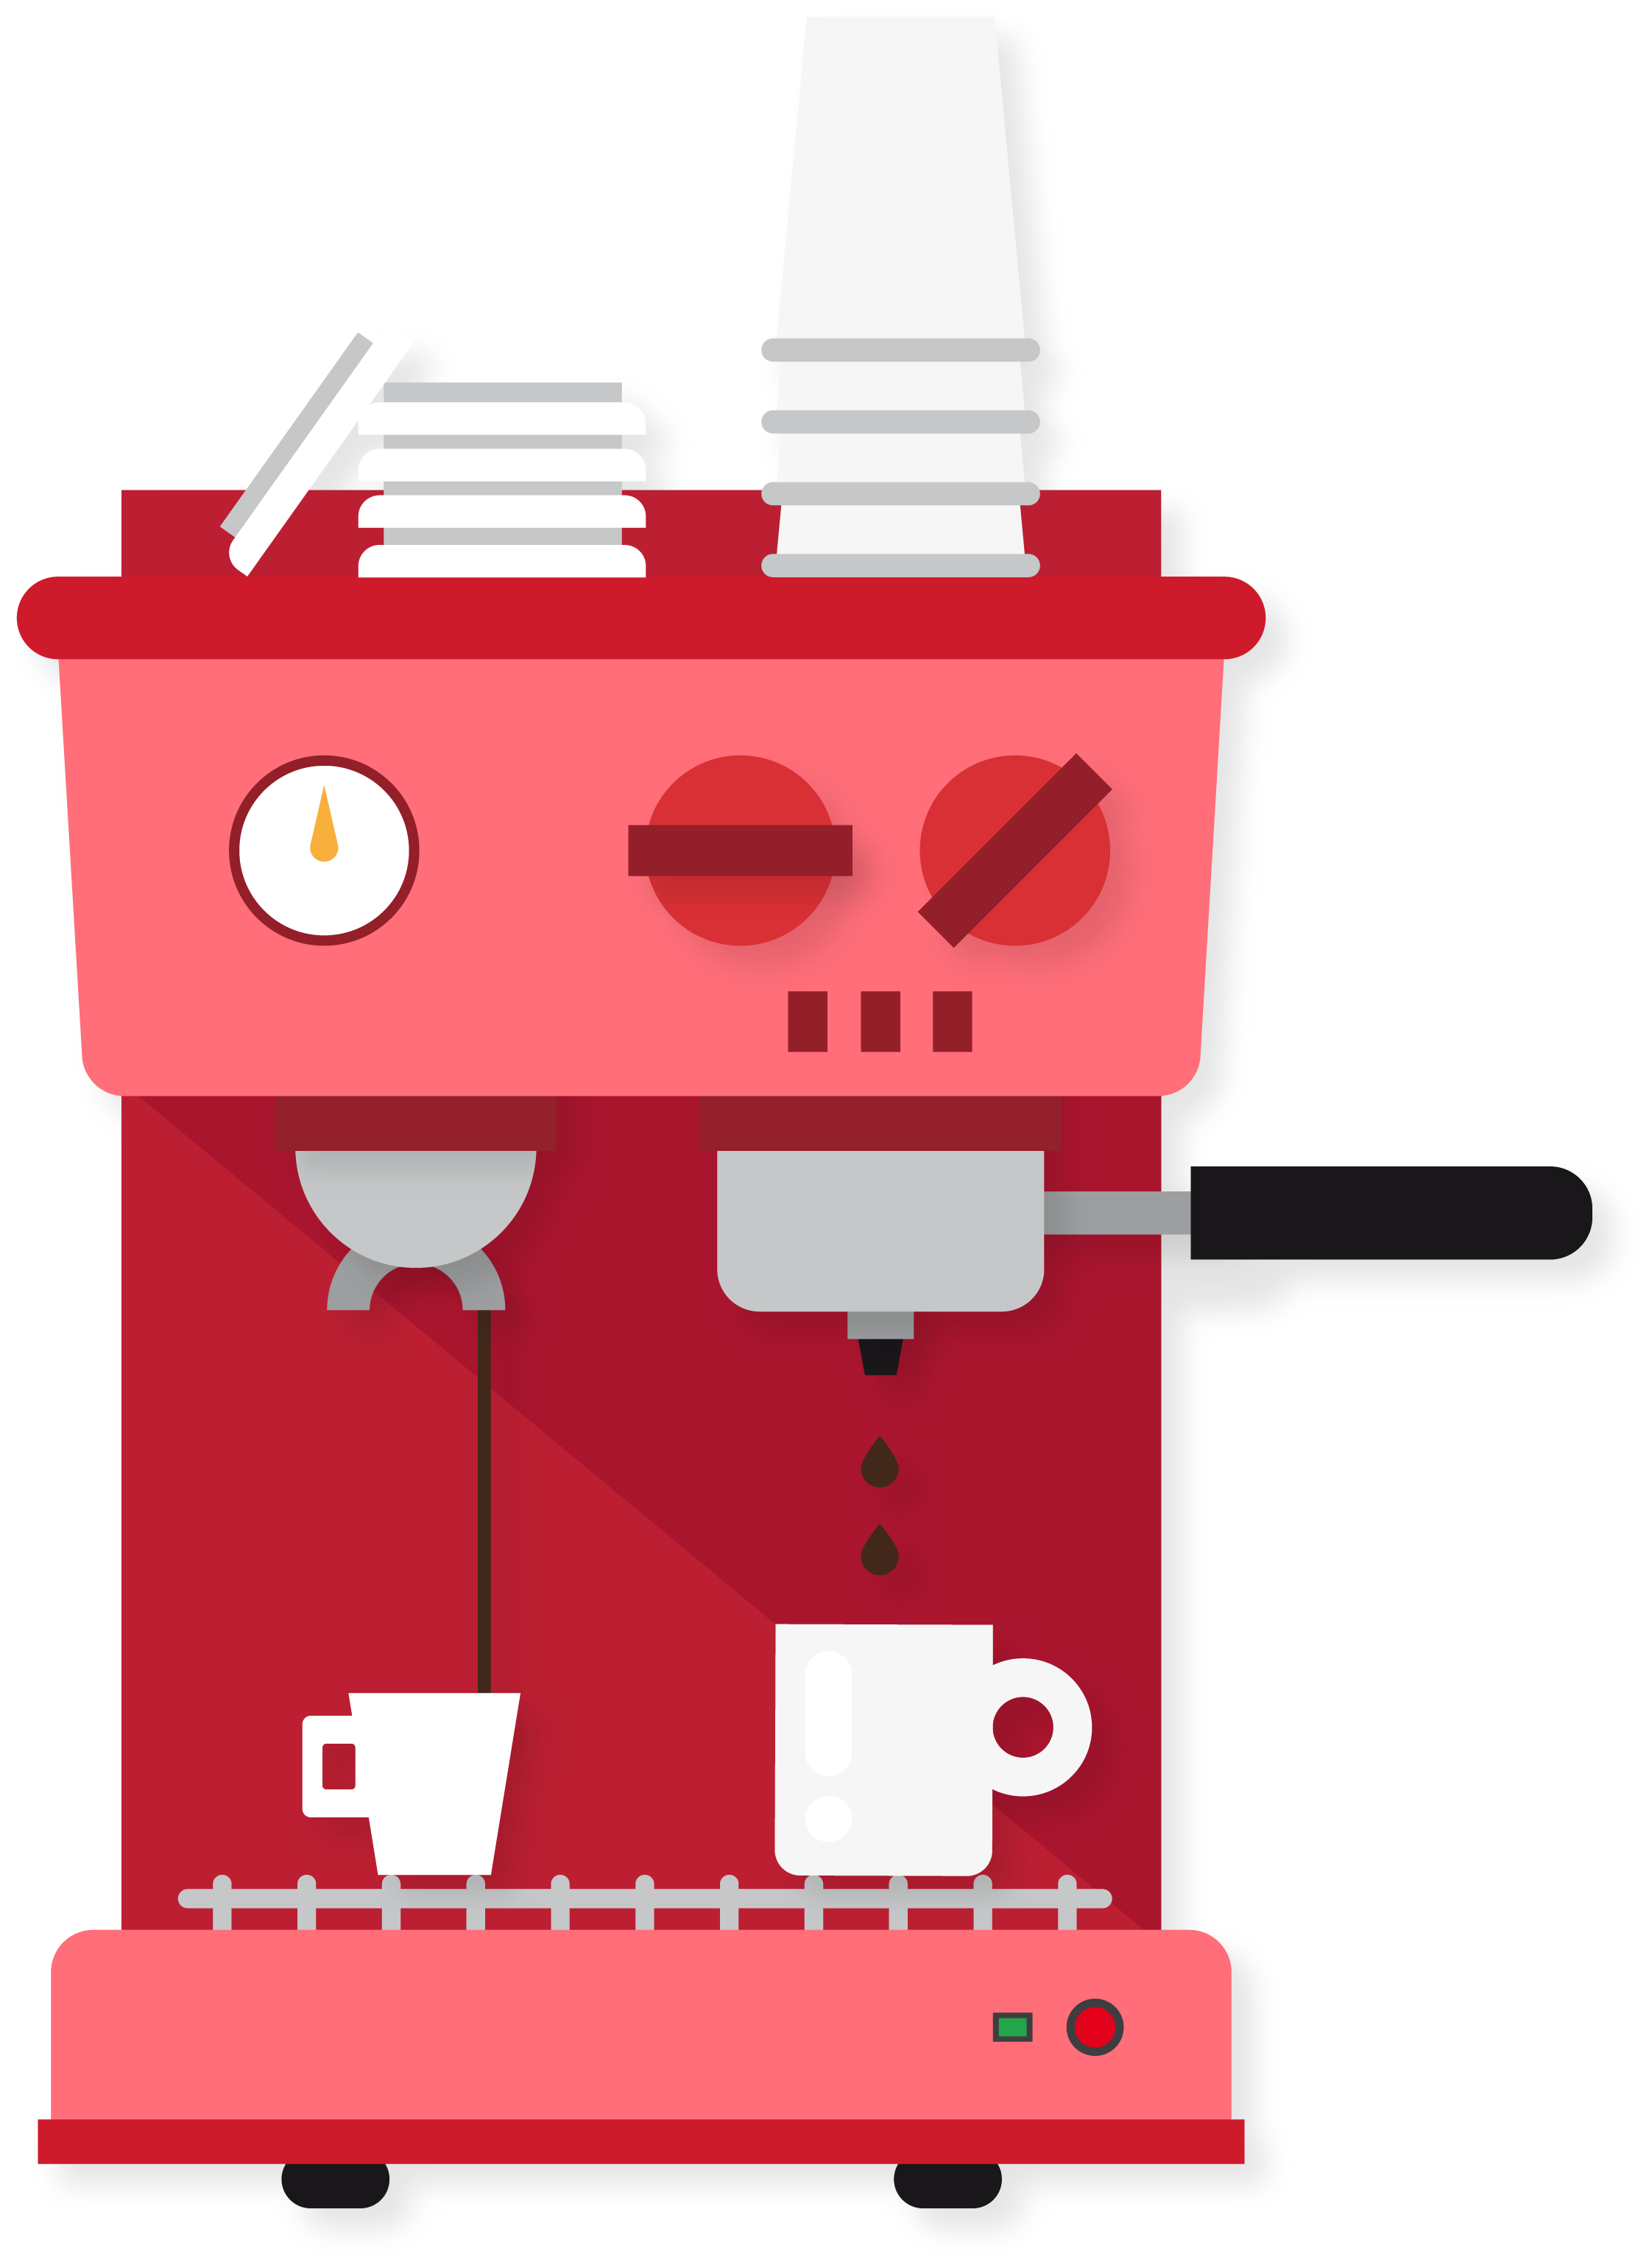 Coffee Instant Espresso Latte Machine Cafe PNG Image